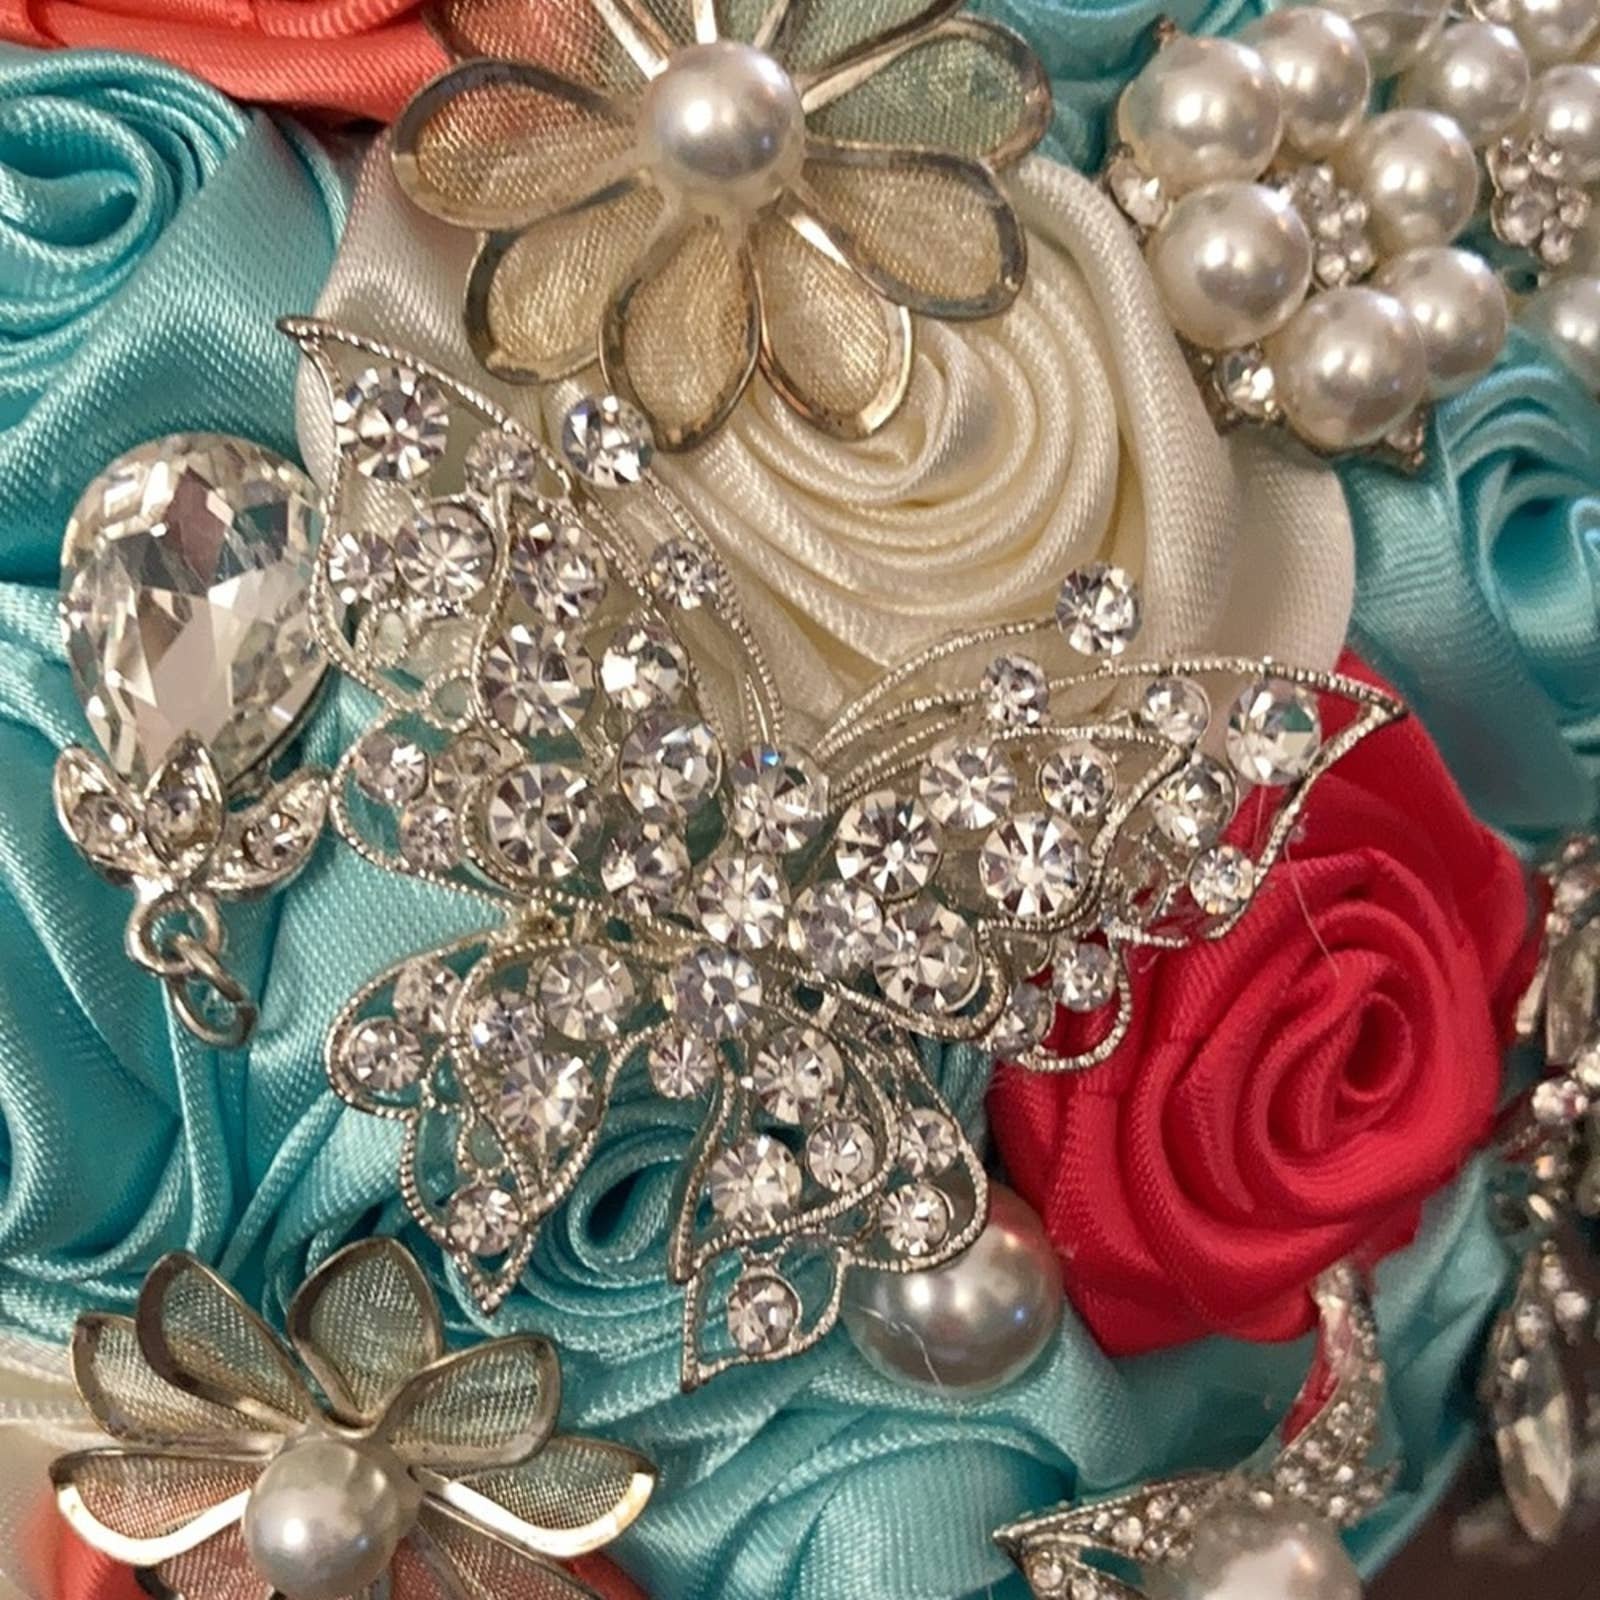 Brooch Bridal Bouquet Satin Rosettes Turquoise Coral Pink Rhinestones Pearls GGftrA2Py